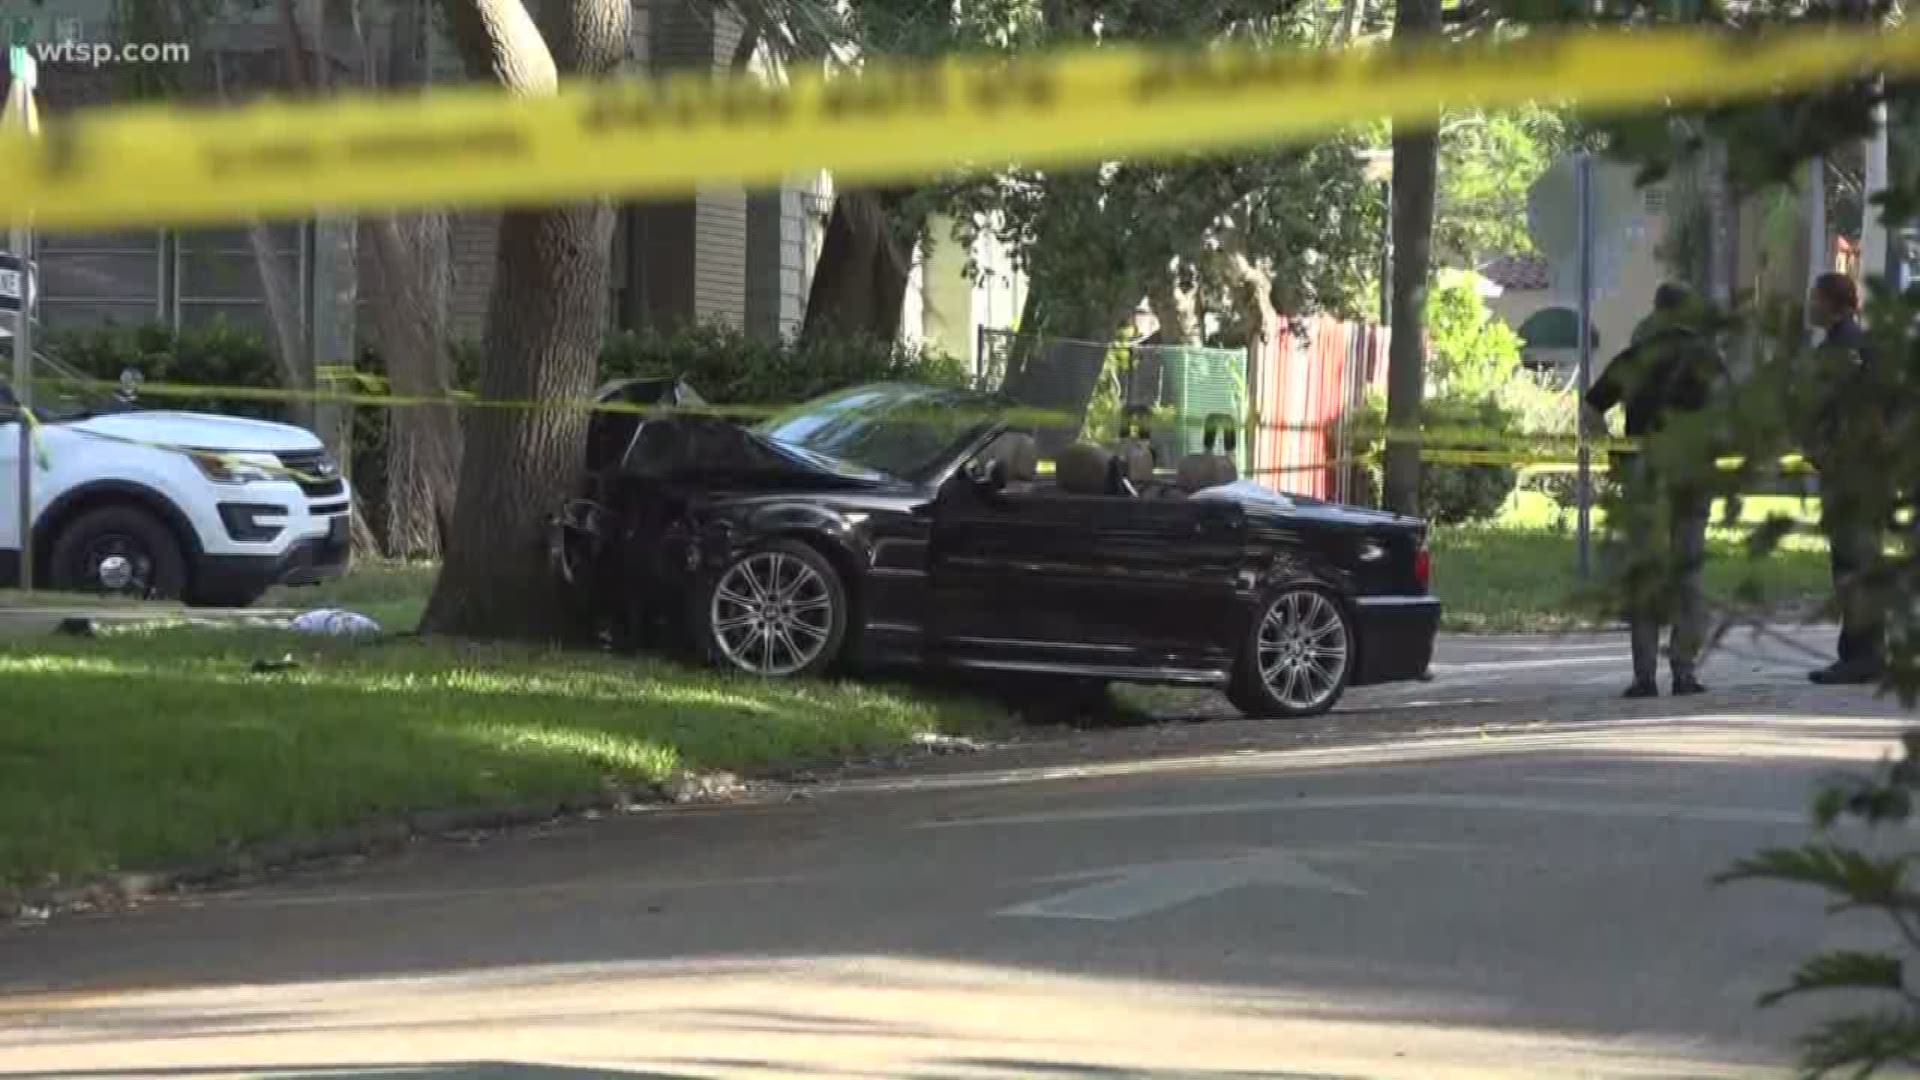 One man was killed and another was injured in the shooting. https://on.wtsp.com/2UrDZOL